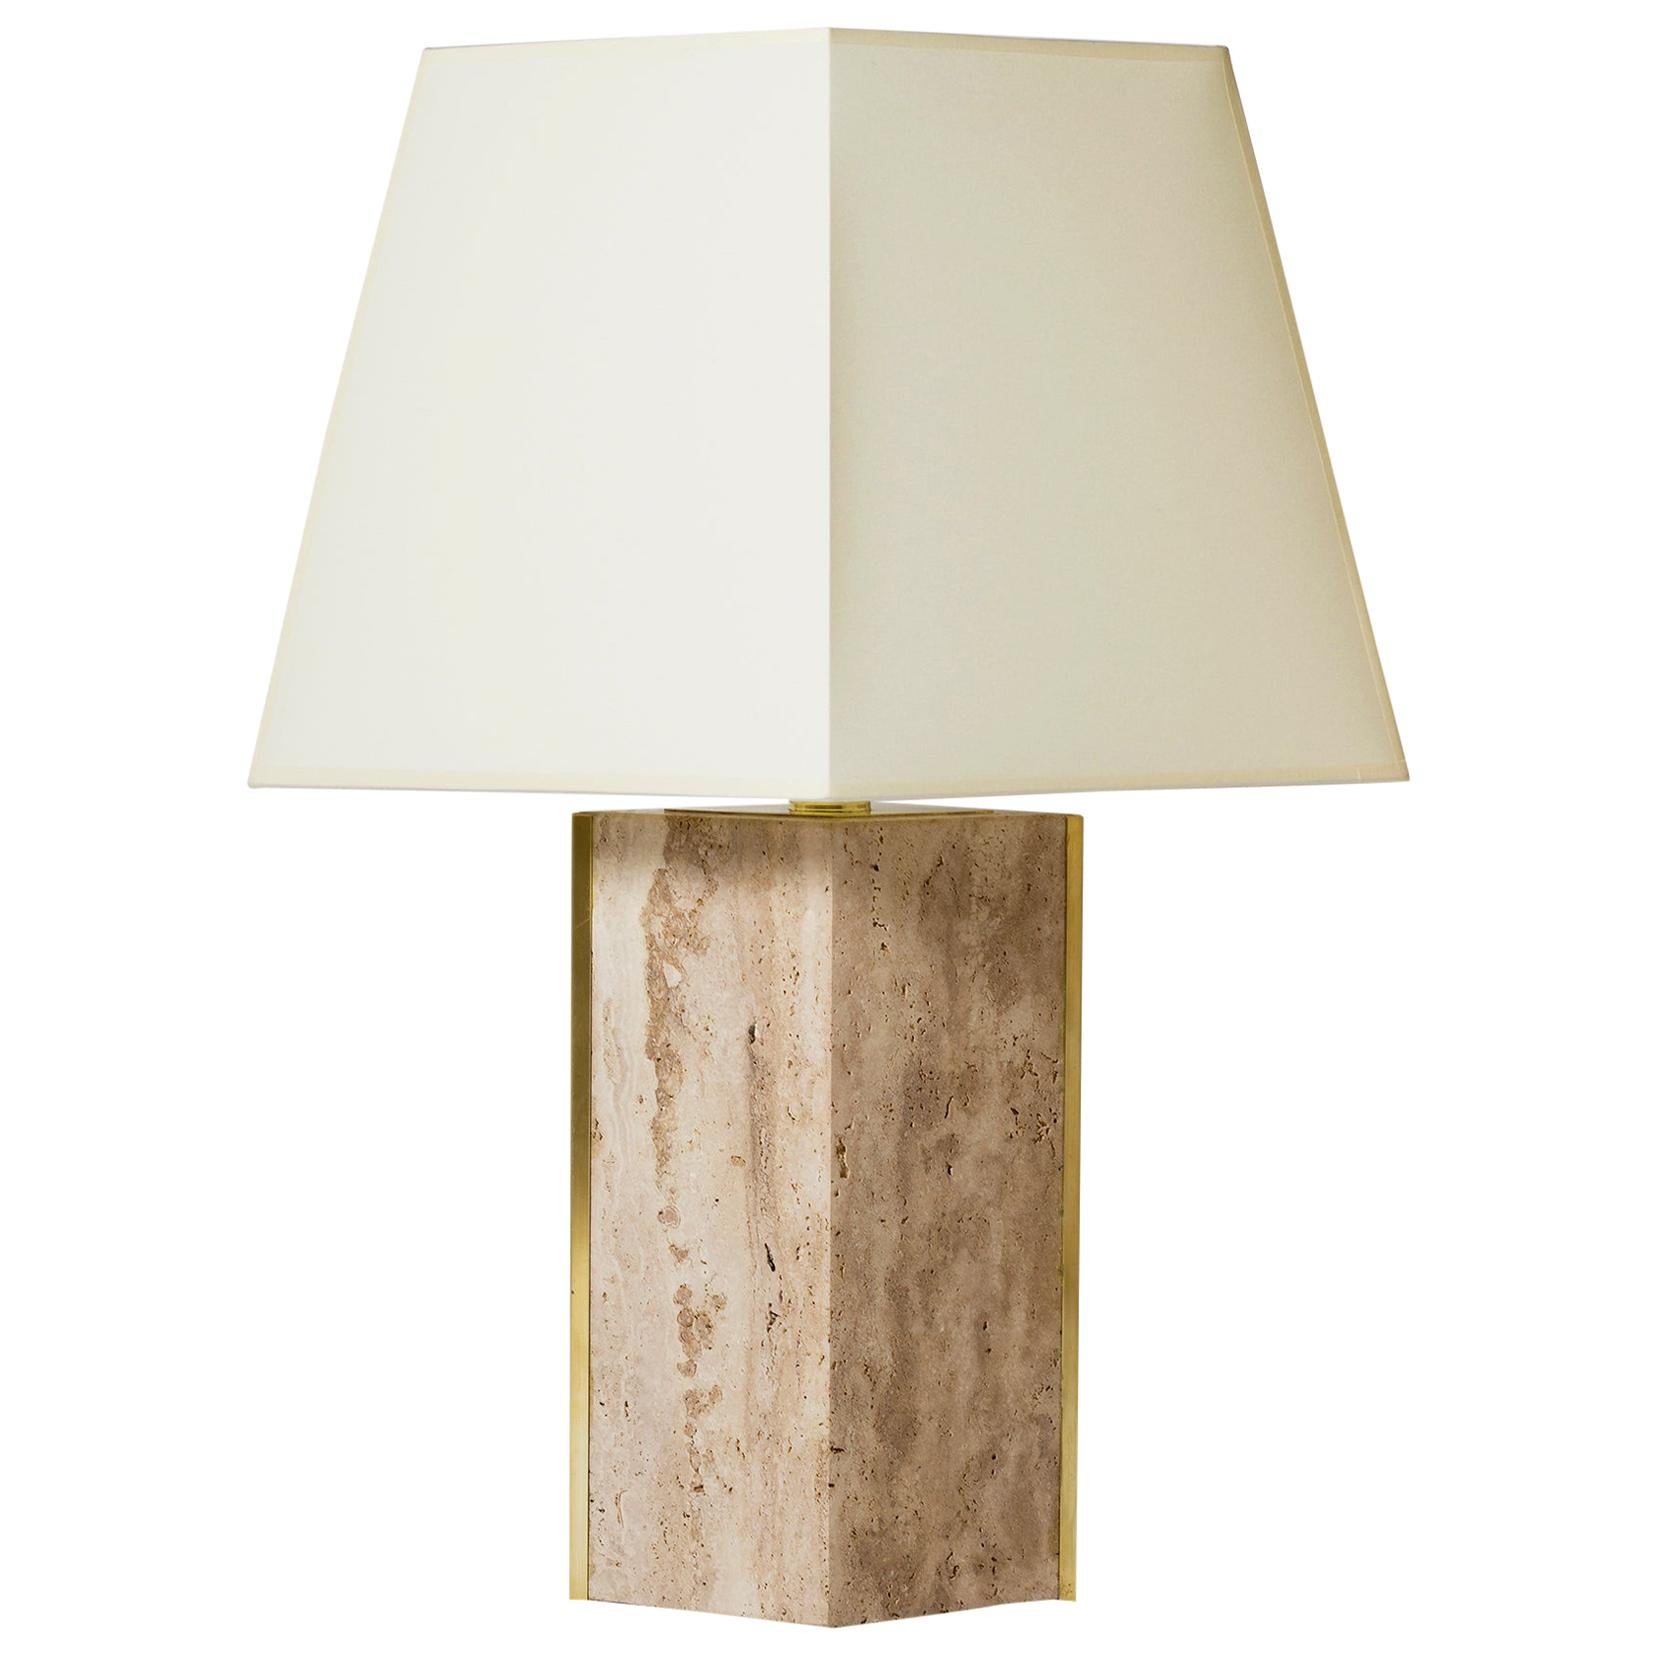 The 'Marine' Travertine and Brass Table Lamp, by Dorian Caffot de Fawes